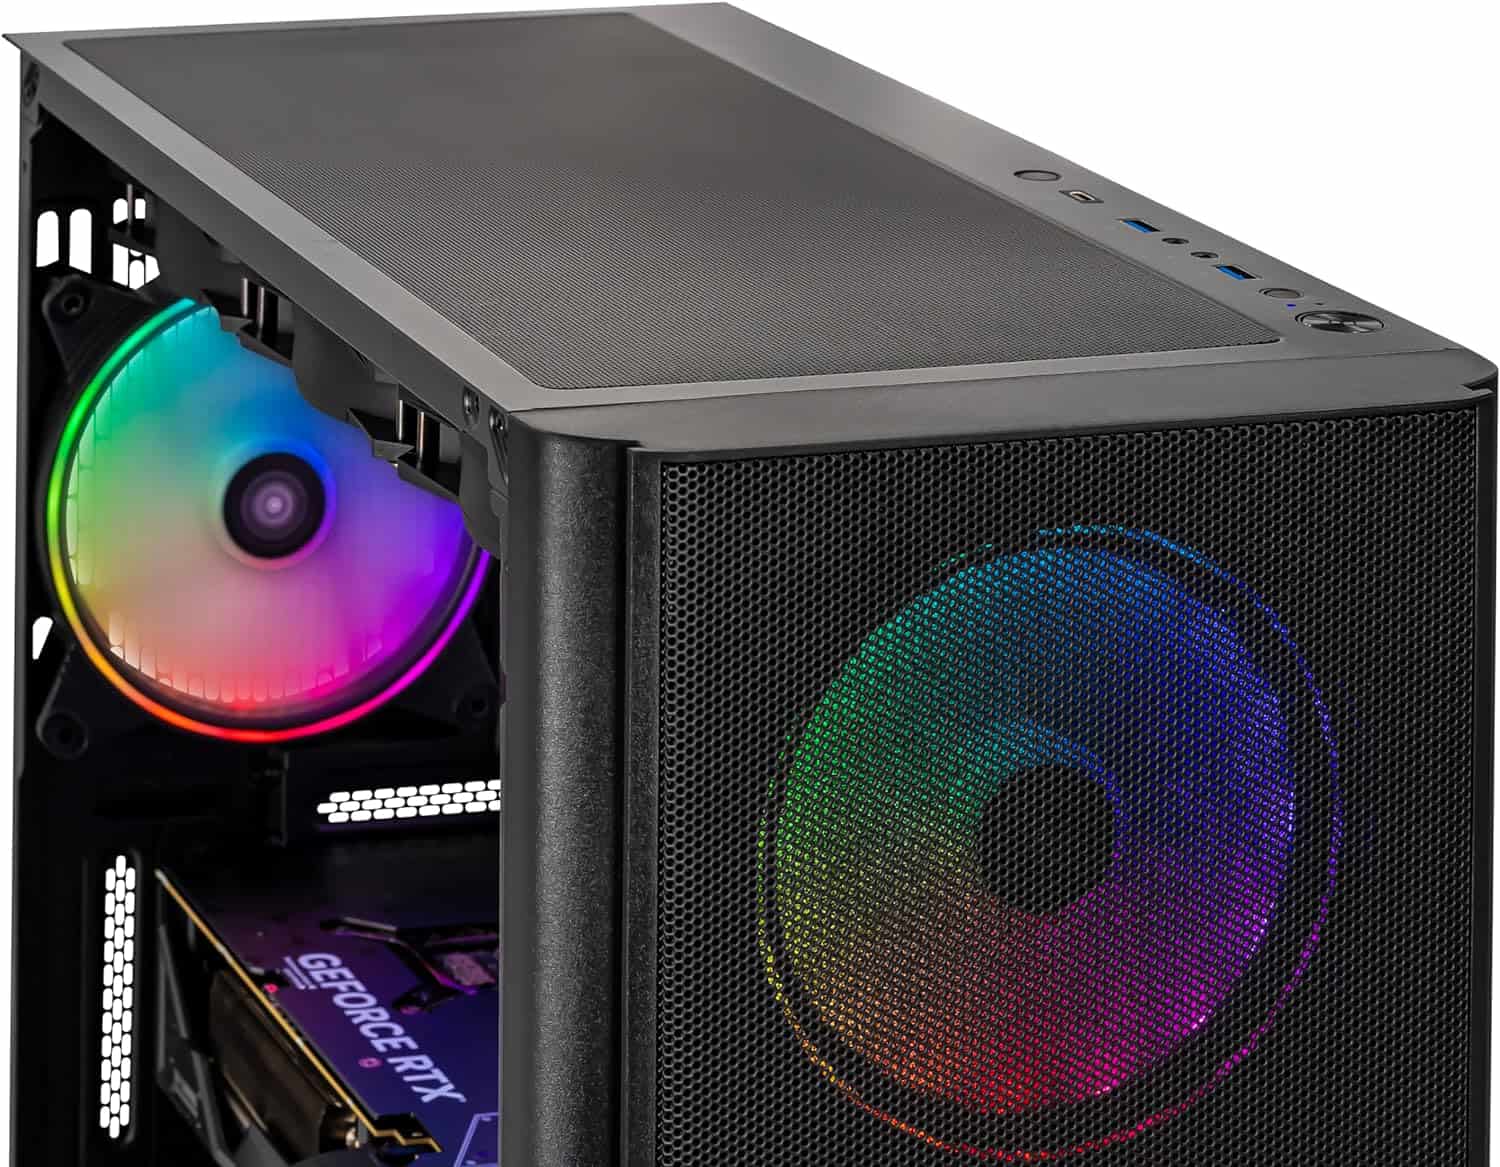 Close-up of a YEYIAN ODACHI desktop computer case with rgb lighting fans, designed for gaming PC enthusiasts.